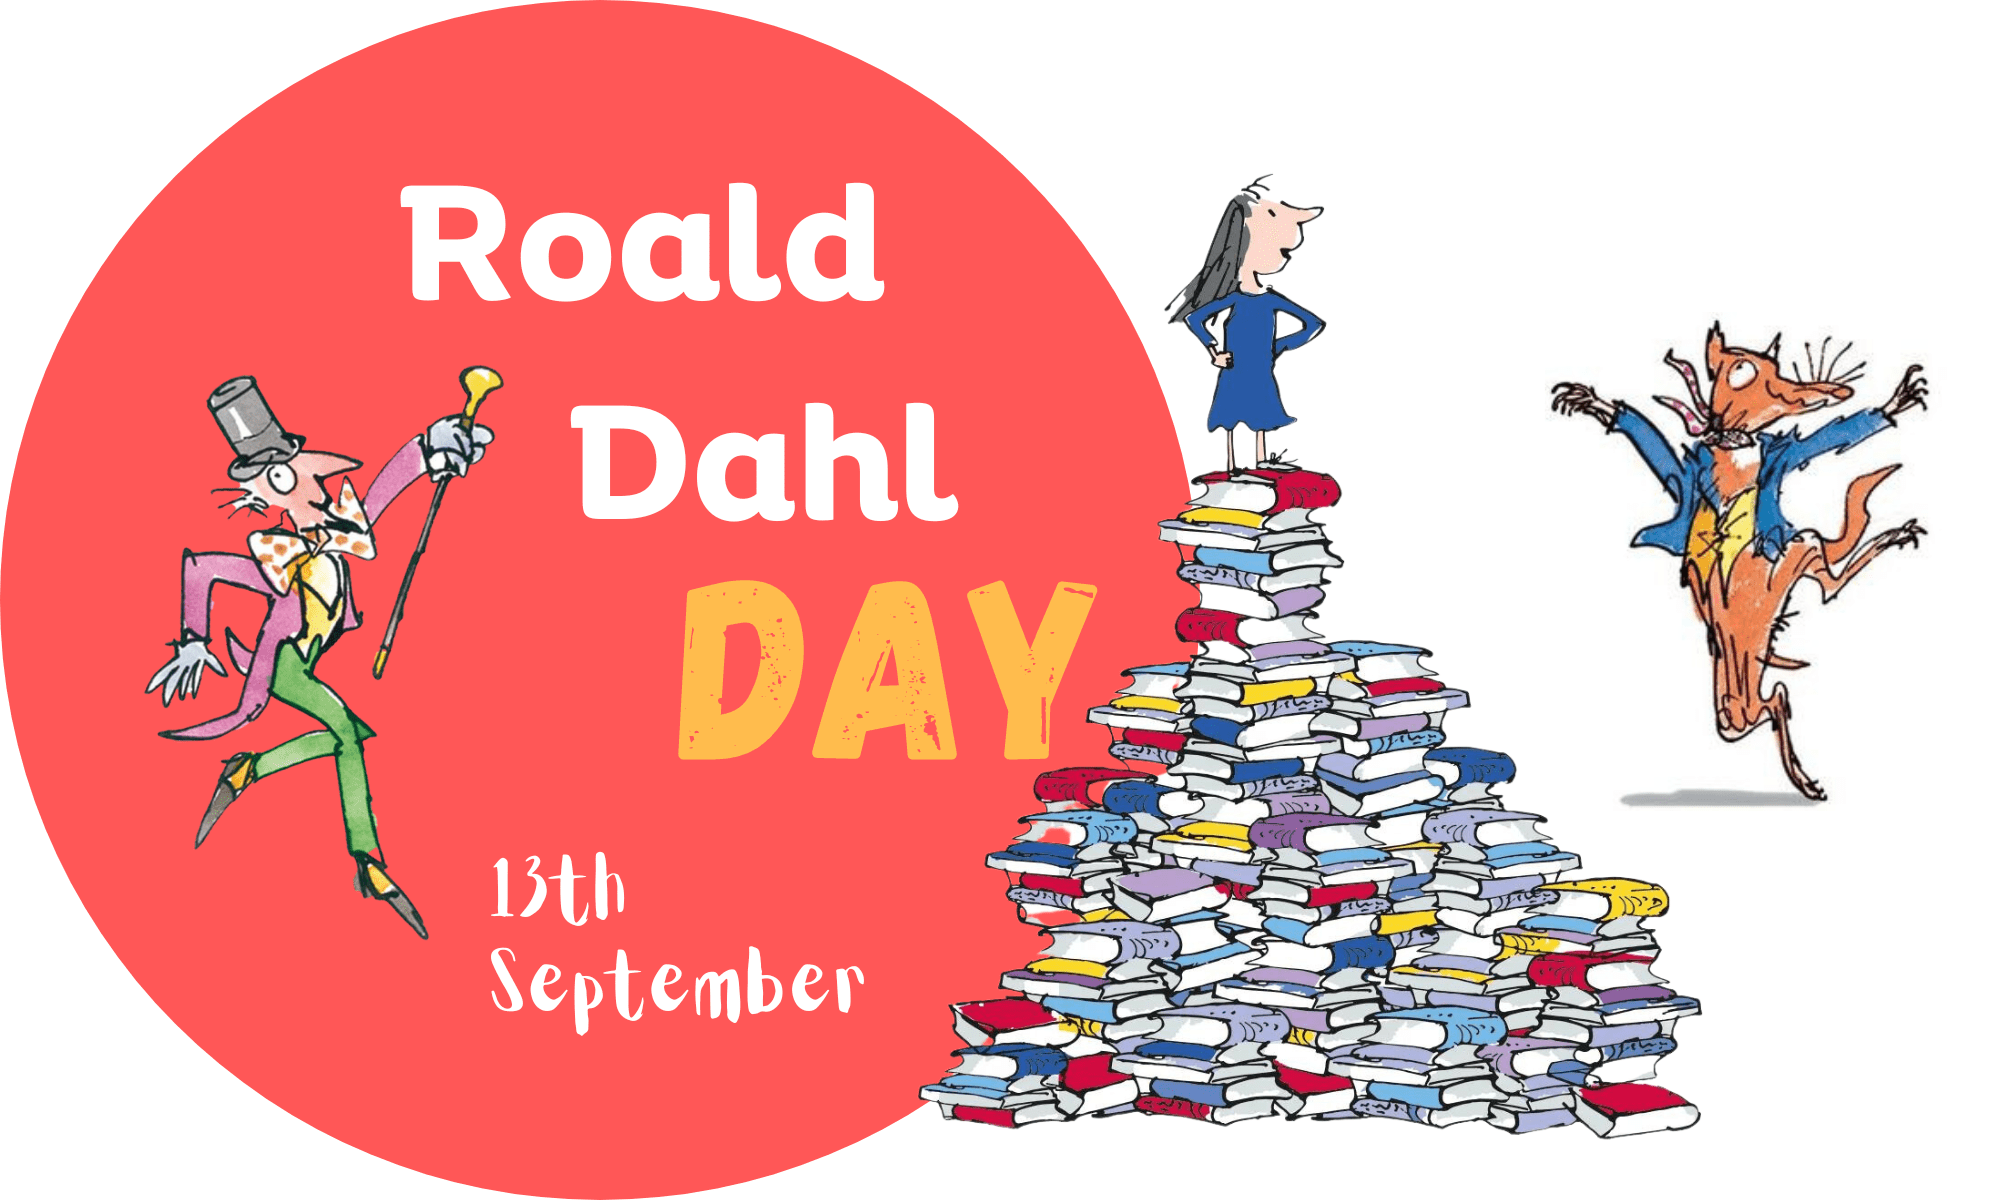 Dress Up Ideas for Roald Dahl Day: Bringing Beloved Characters to Life!